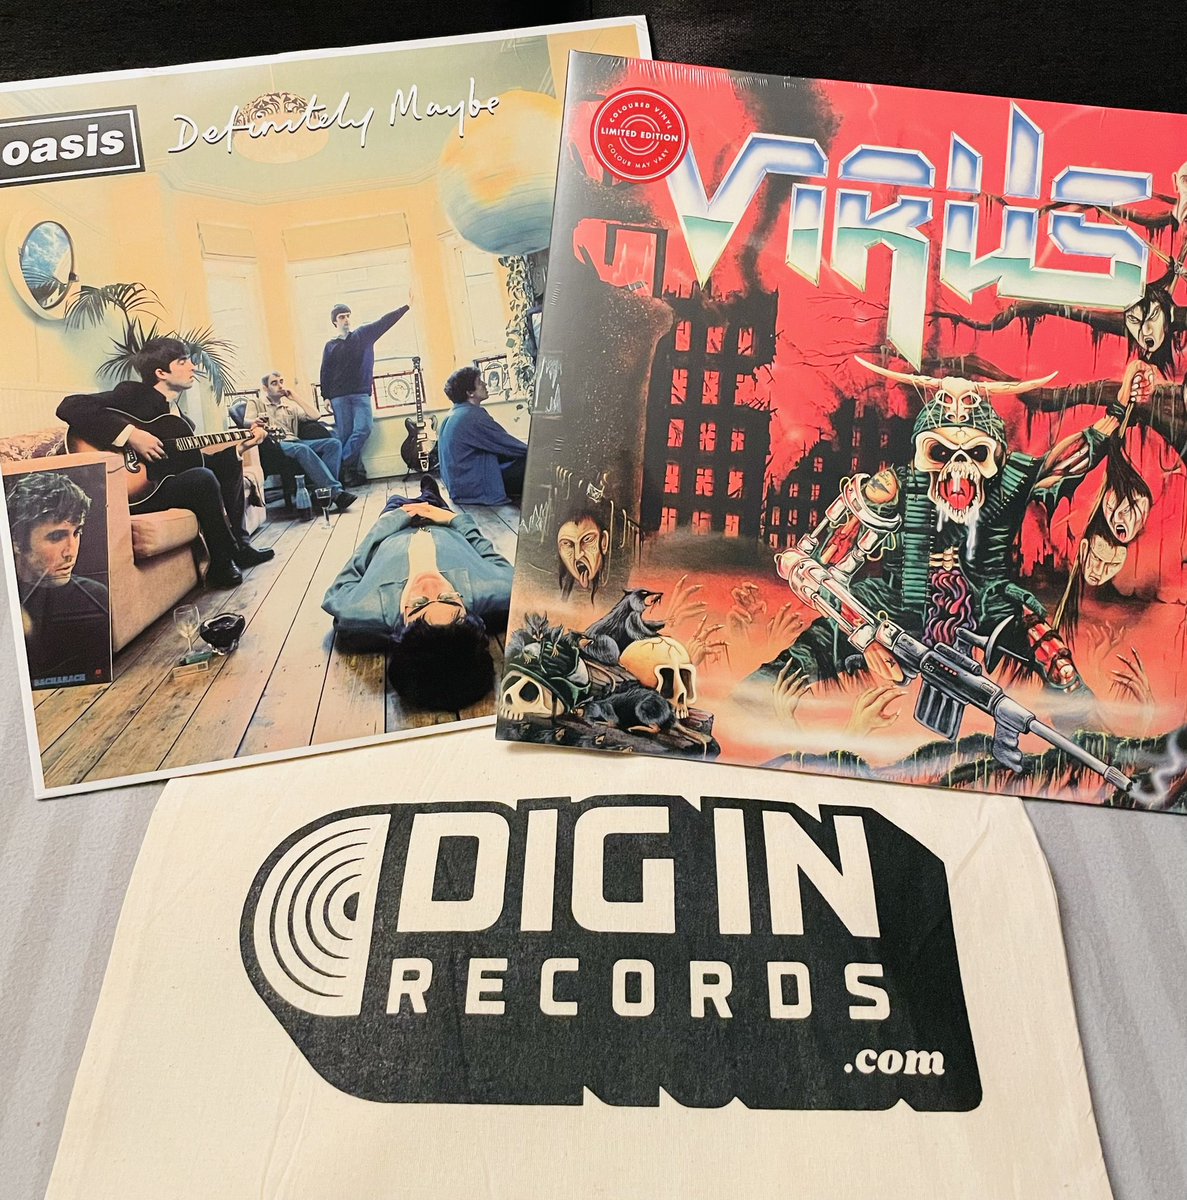 Checking out @DiginRecords today, great vinyl shop just opened in Woking.